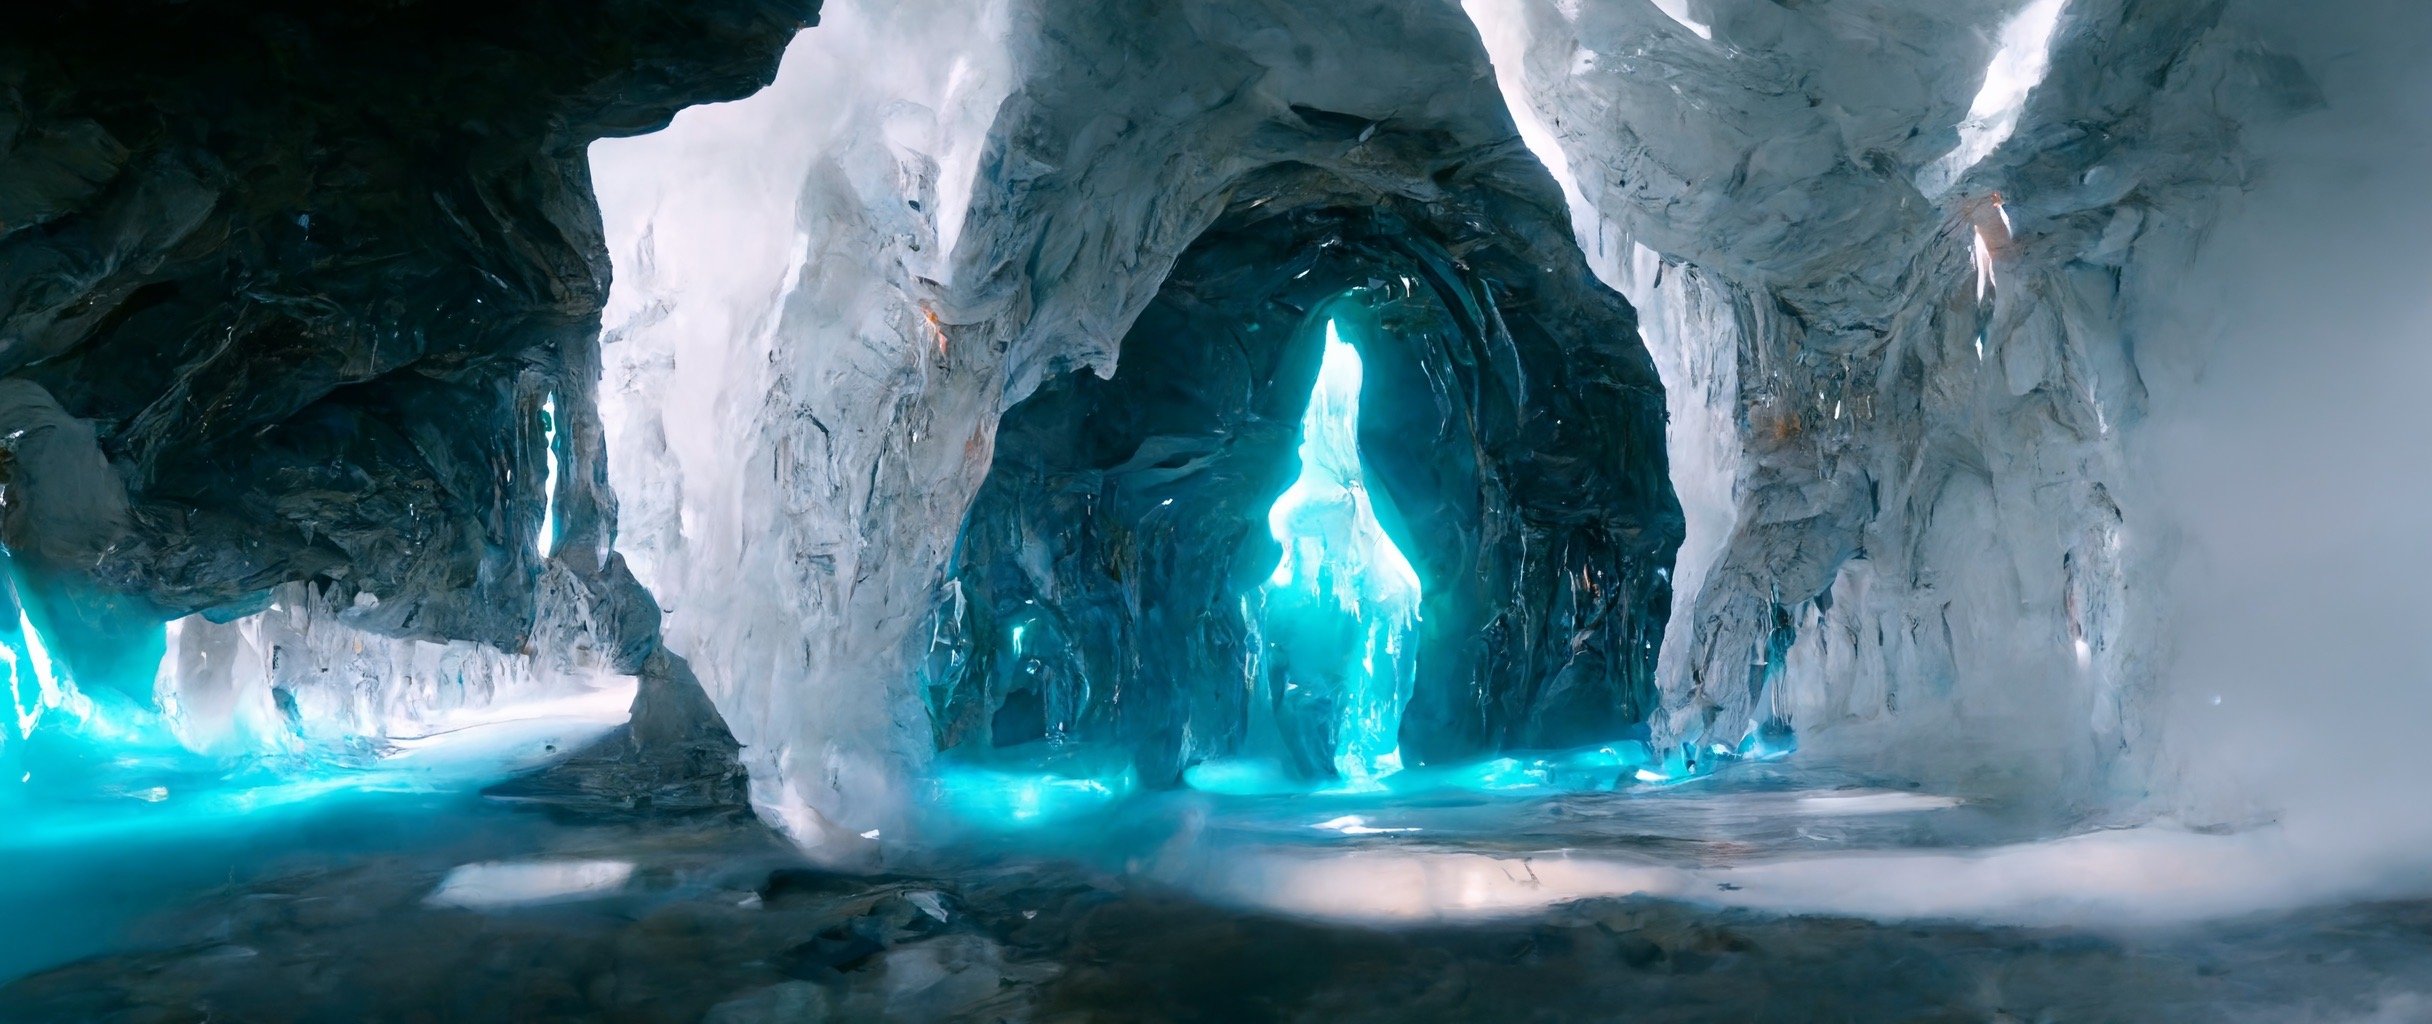 73718f22-e064-4f1e-b3fd-40593f42ceaa_S3RAPH_epic_video_game_style_boss_fight_in_mystical_detailed_ice_cave._motion_blur_attach._8k_cinematic_com (1).JPG